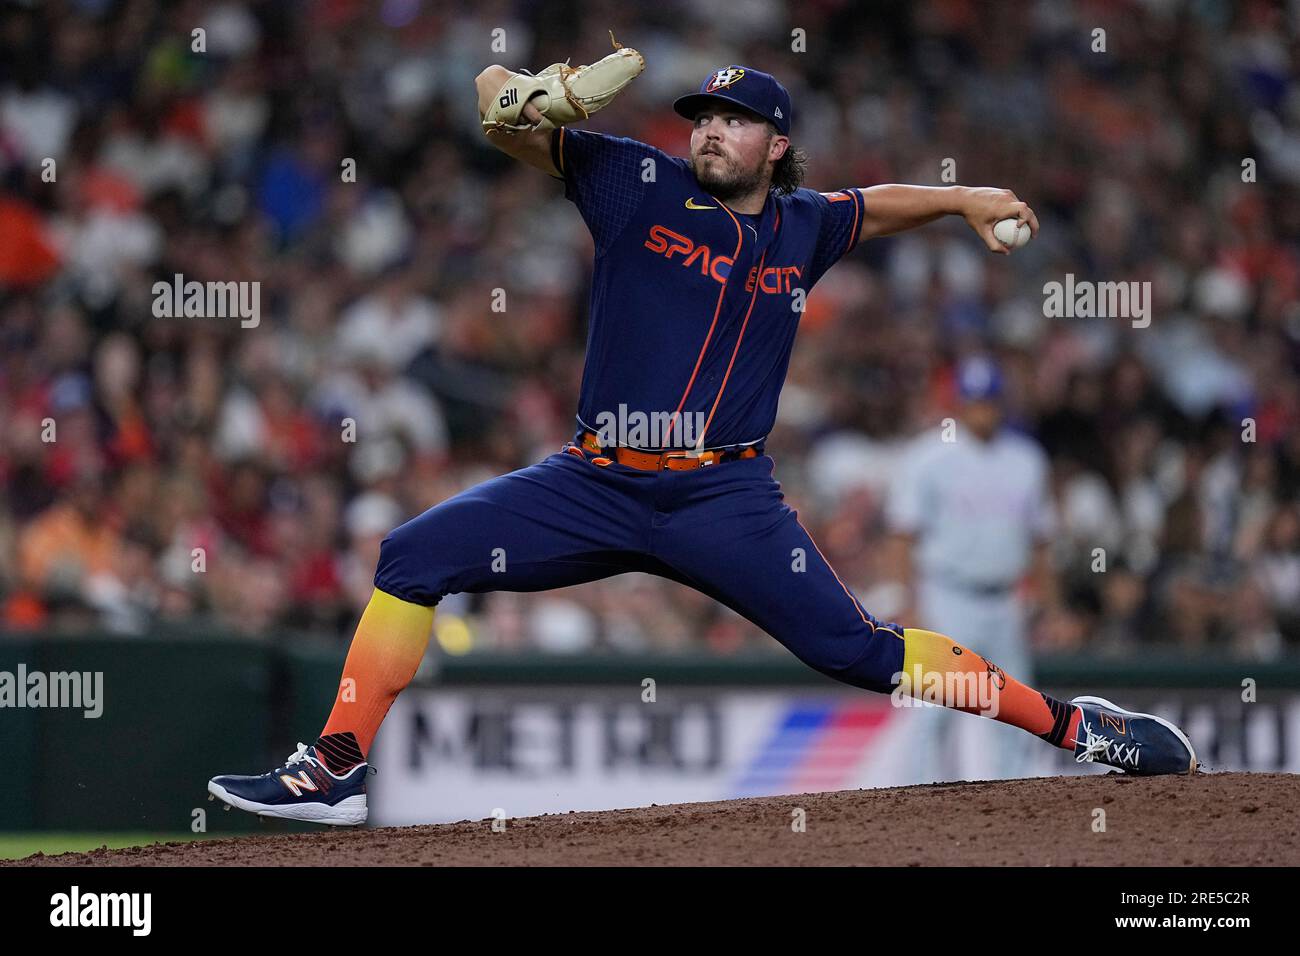 Houston Astros relief pitcher Parker Mushinski looks in at the